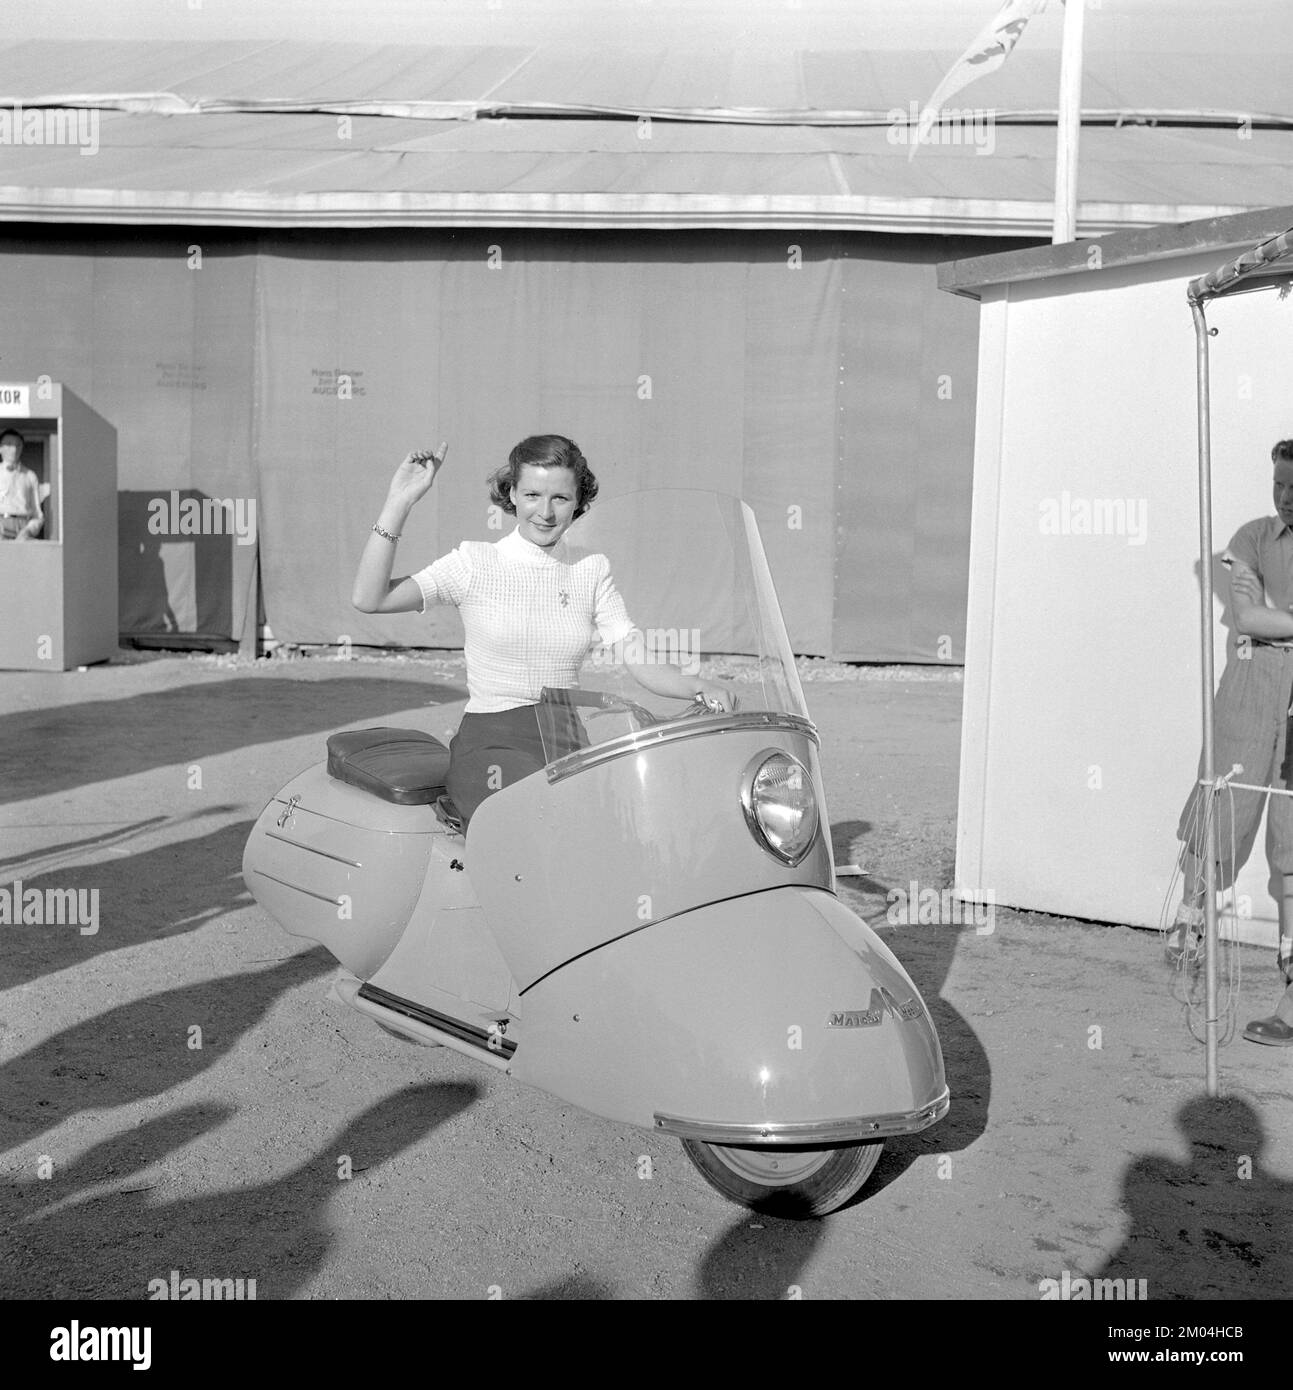 In the 1950s. A young woman seen on a german made scooter model Maico Mobil. Sweden 1951 Stock Photo